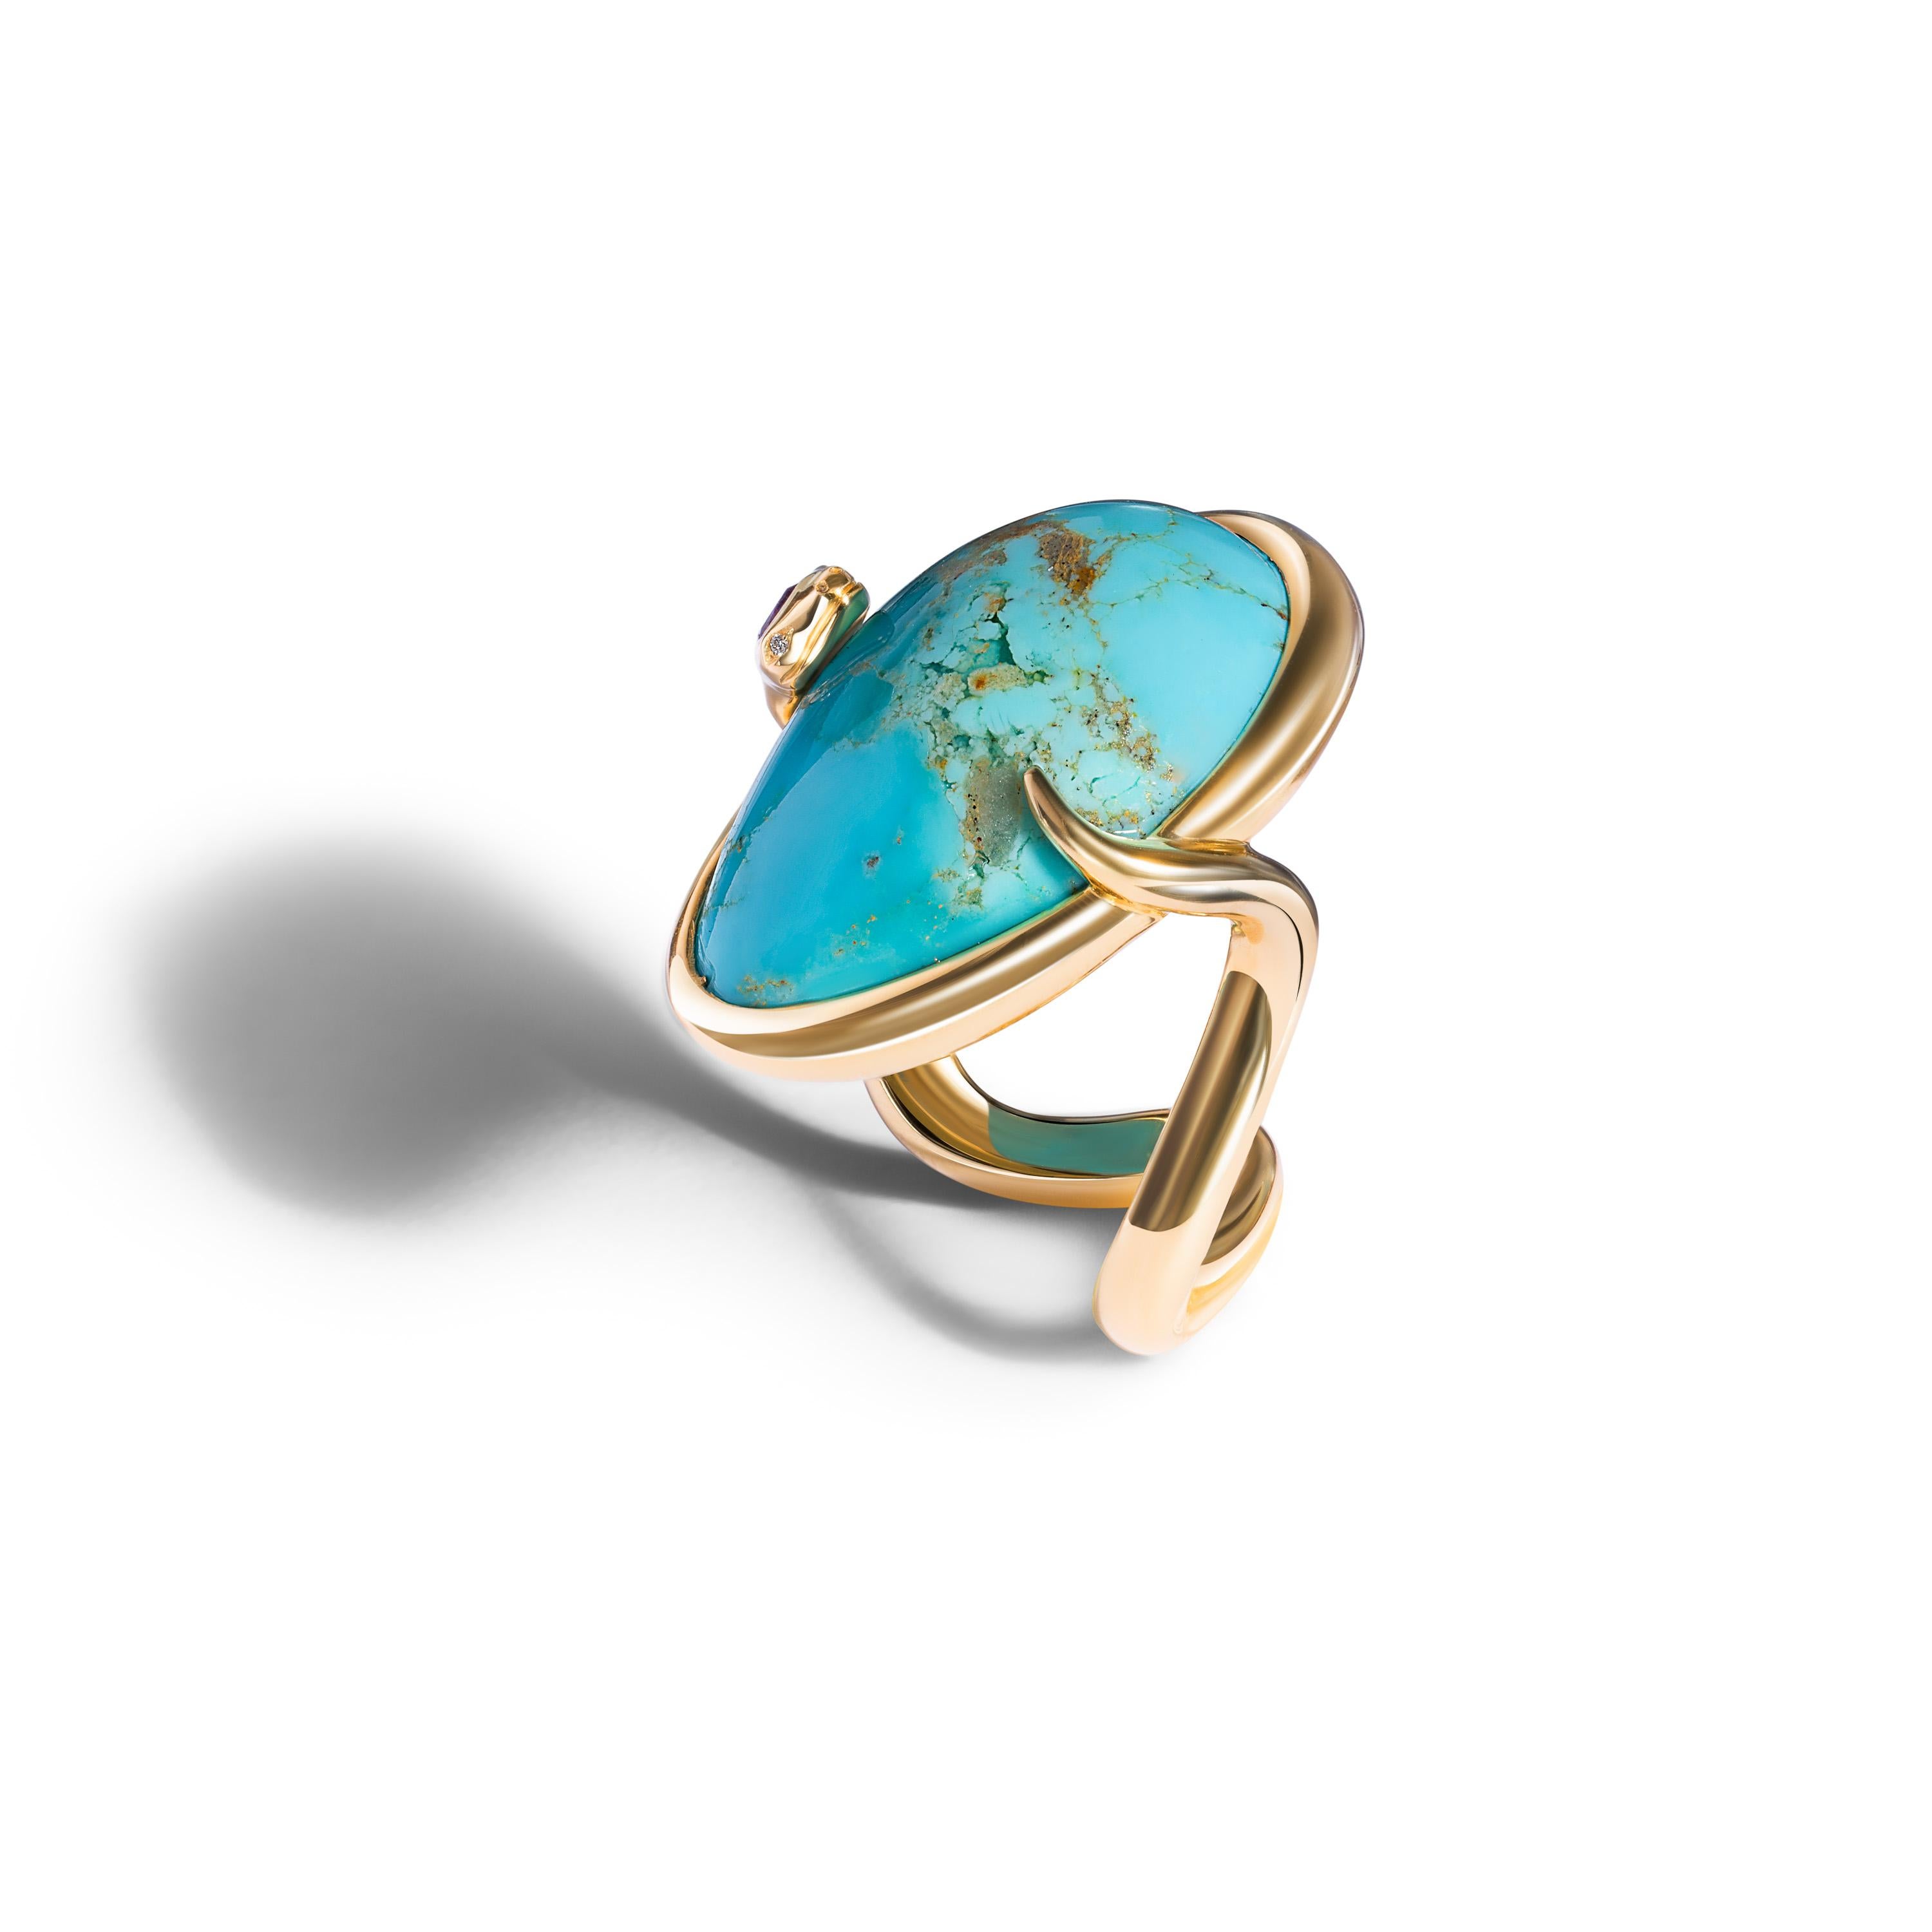 “DELPHI” is a statement  18 K. Rose gold snake cocktail ring, set with a natural Arizona turquoise matrix cabochon (25,3 cts) amethyst, and white diamonds. 
Handcrafted in Geneva Switzerland. Size 53.